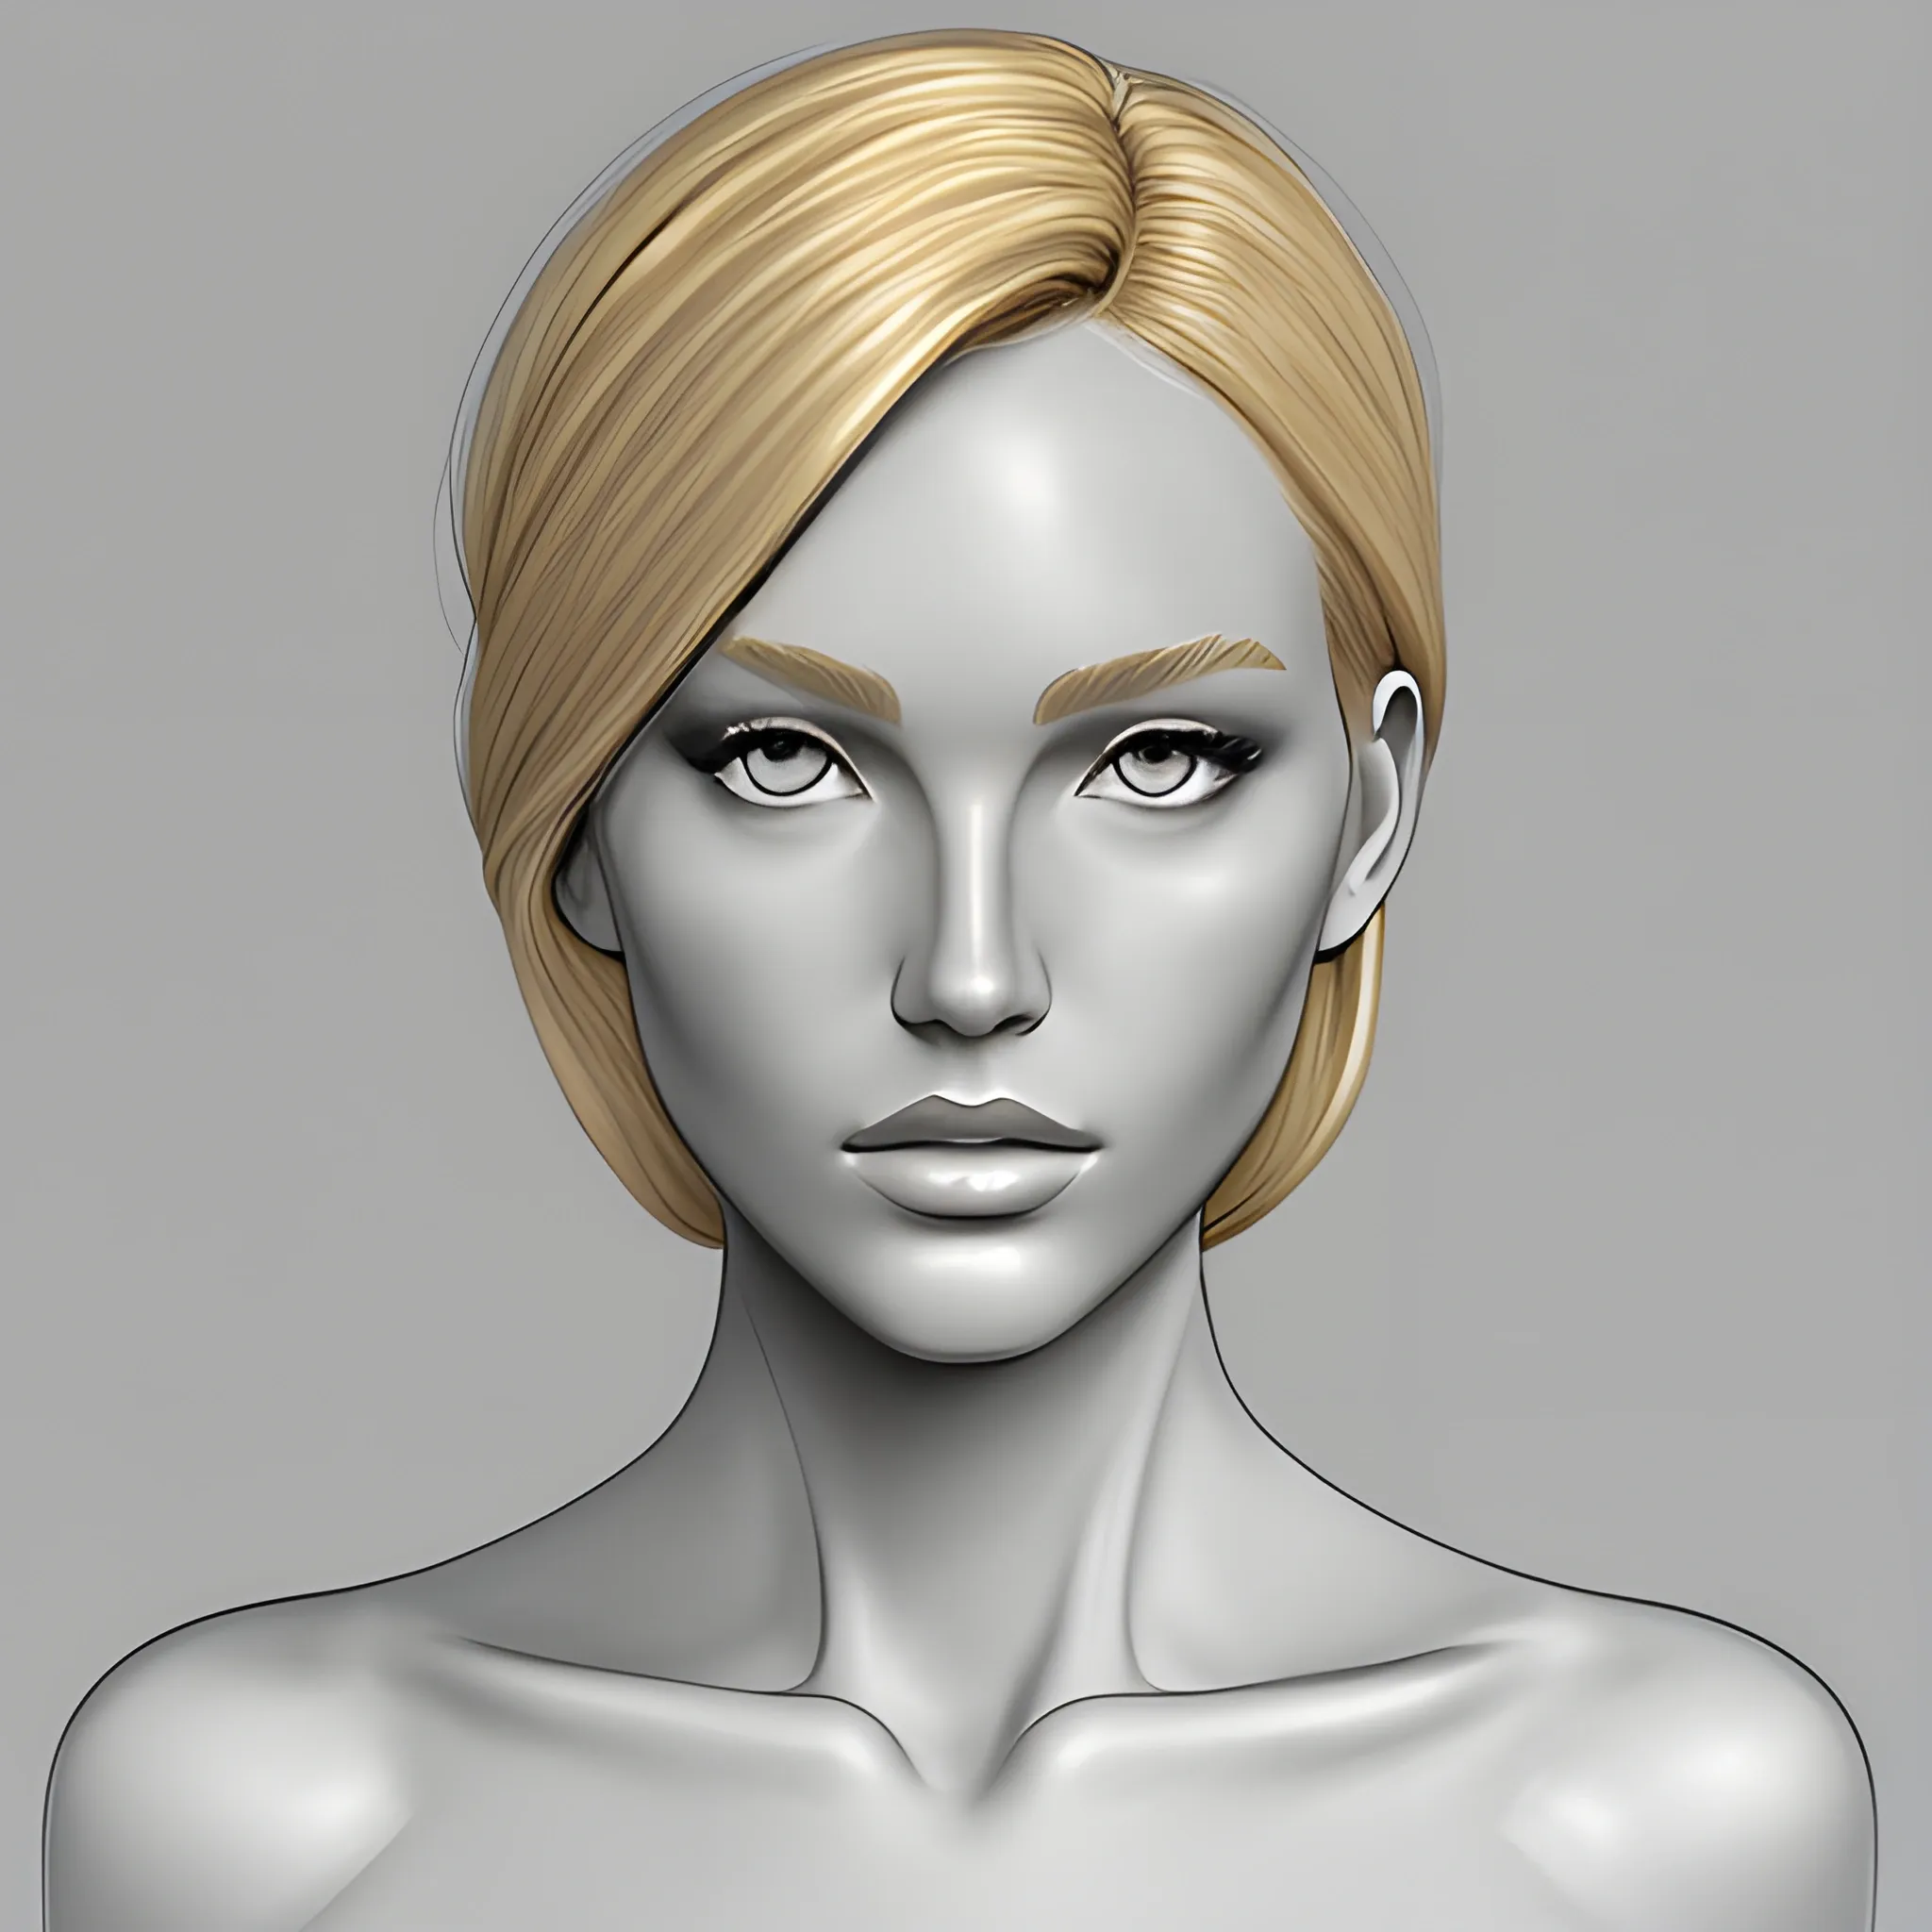 fashion croquis of 10” for a base to do fashion illustration. skin rendered. no garments on just nude undergarments  the figure. face rendered with blonde hair

digital art